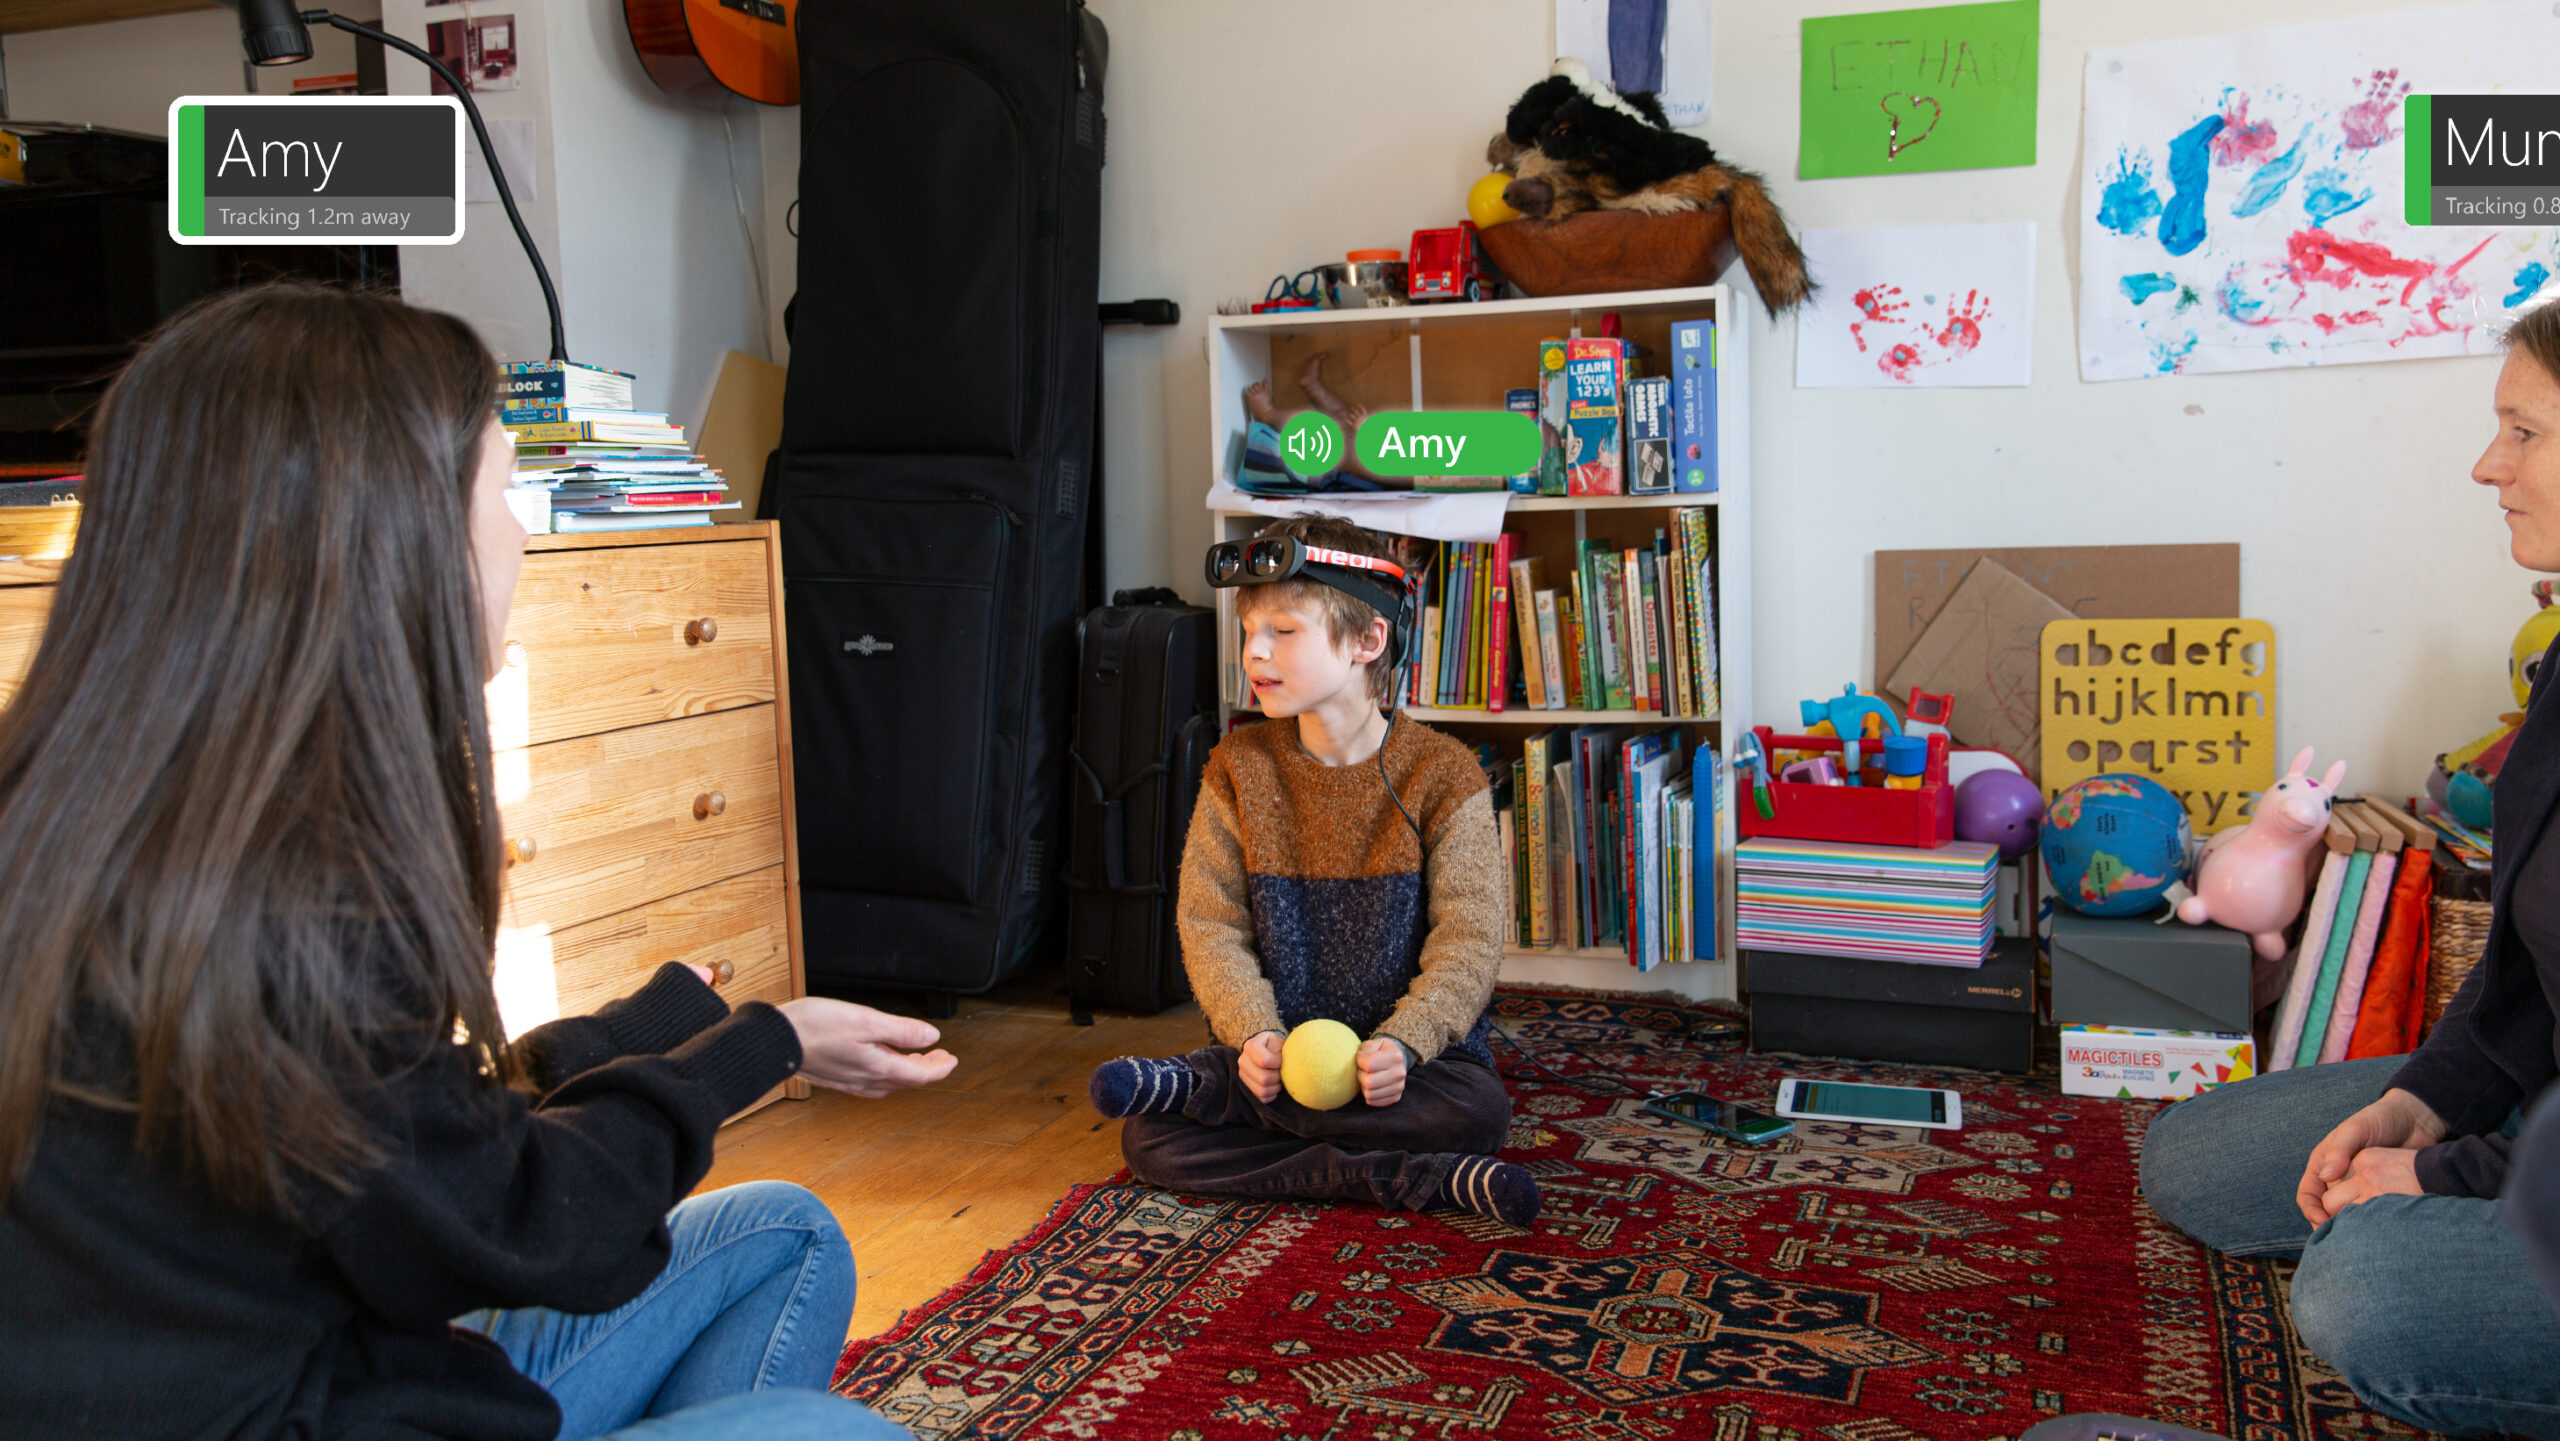 A young boy wearing the PeopleLens sits on the floor of a playroom holding a blind tennis ball in his hands. His attention is directed toward a woman sitting on the floor in front of him holding her hands out. The PeopleLens looks like small goggles that sit on the forehead. The image is marked with visual annotations to indicate what the PeopleLens is seeing and what sounds are being heard.